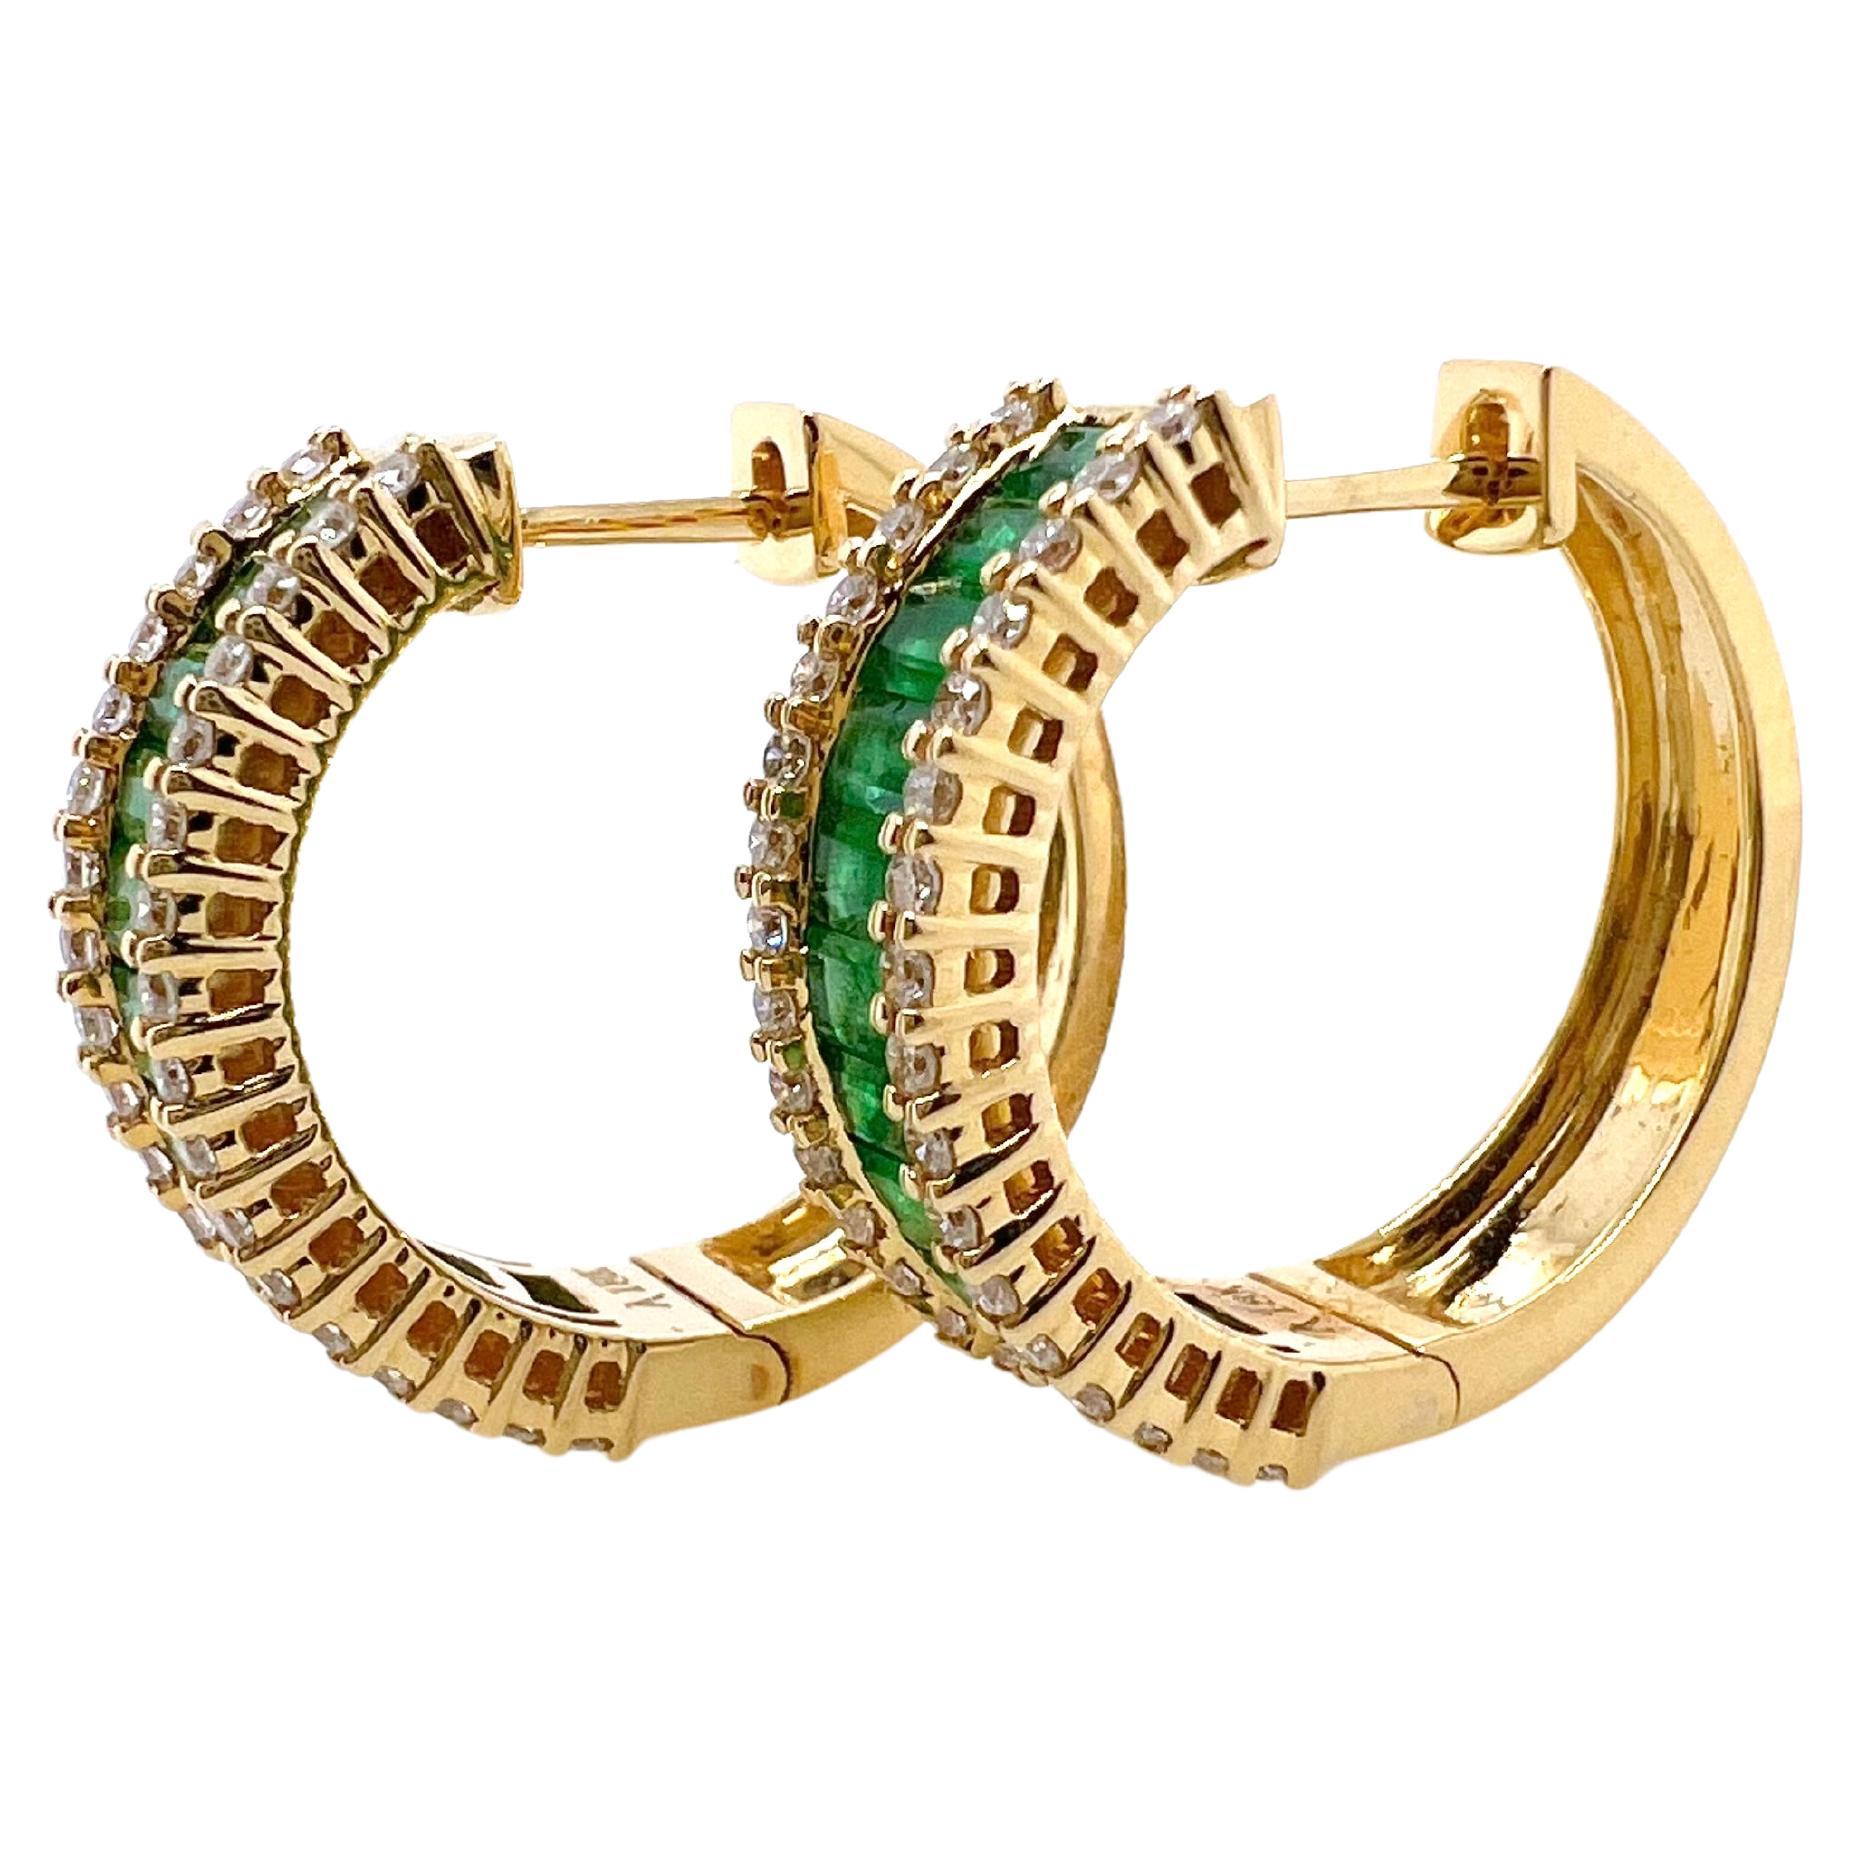 These gorgeous emerald hoop earrings are set in 18k yellow gold with round brilliant diamonds on the shoulders.  The vivid emerald stand out against the yellow gold and are perfect for the smart casual look!


Stone: Emerald 2.39 cts,